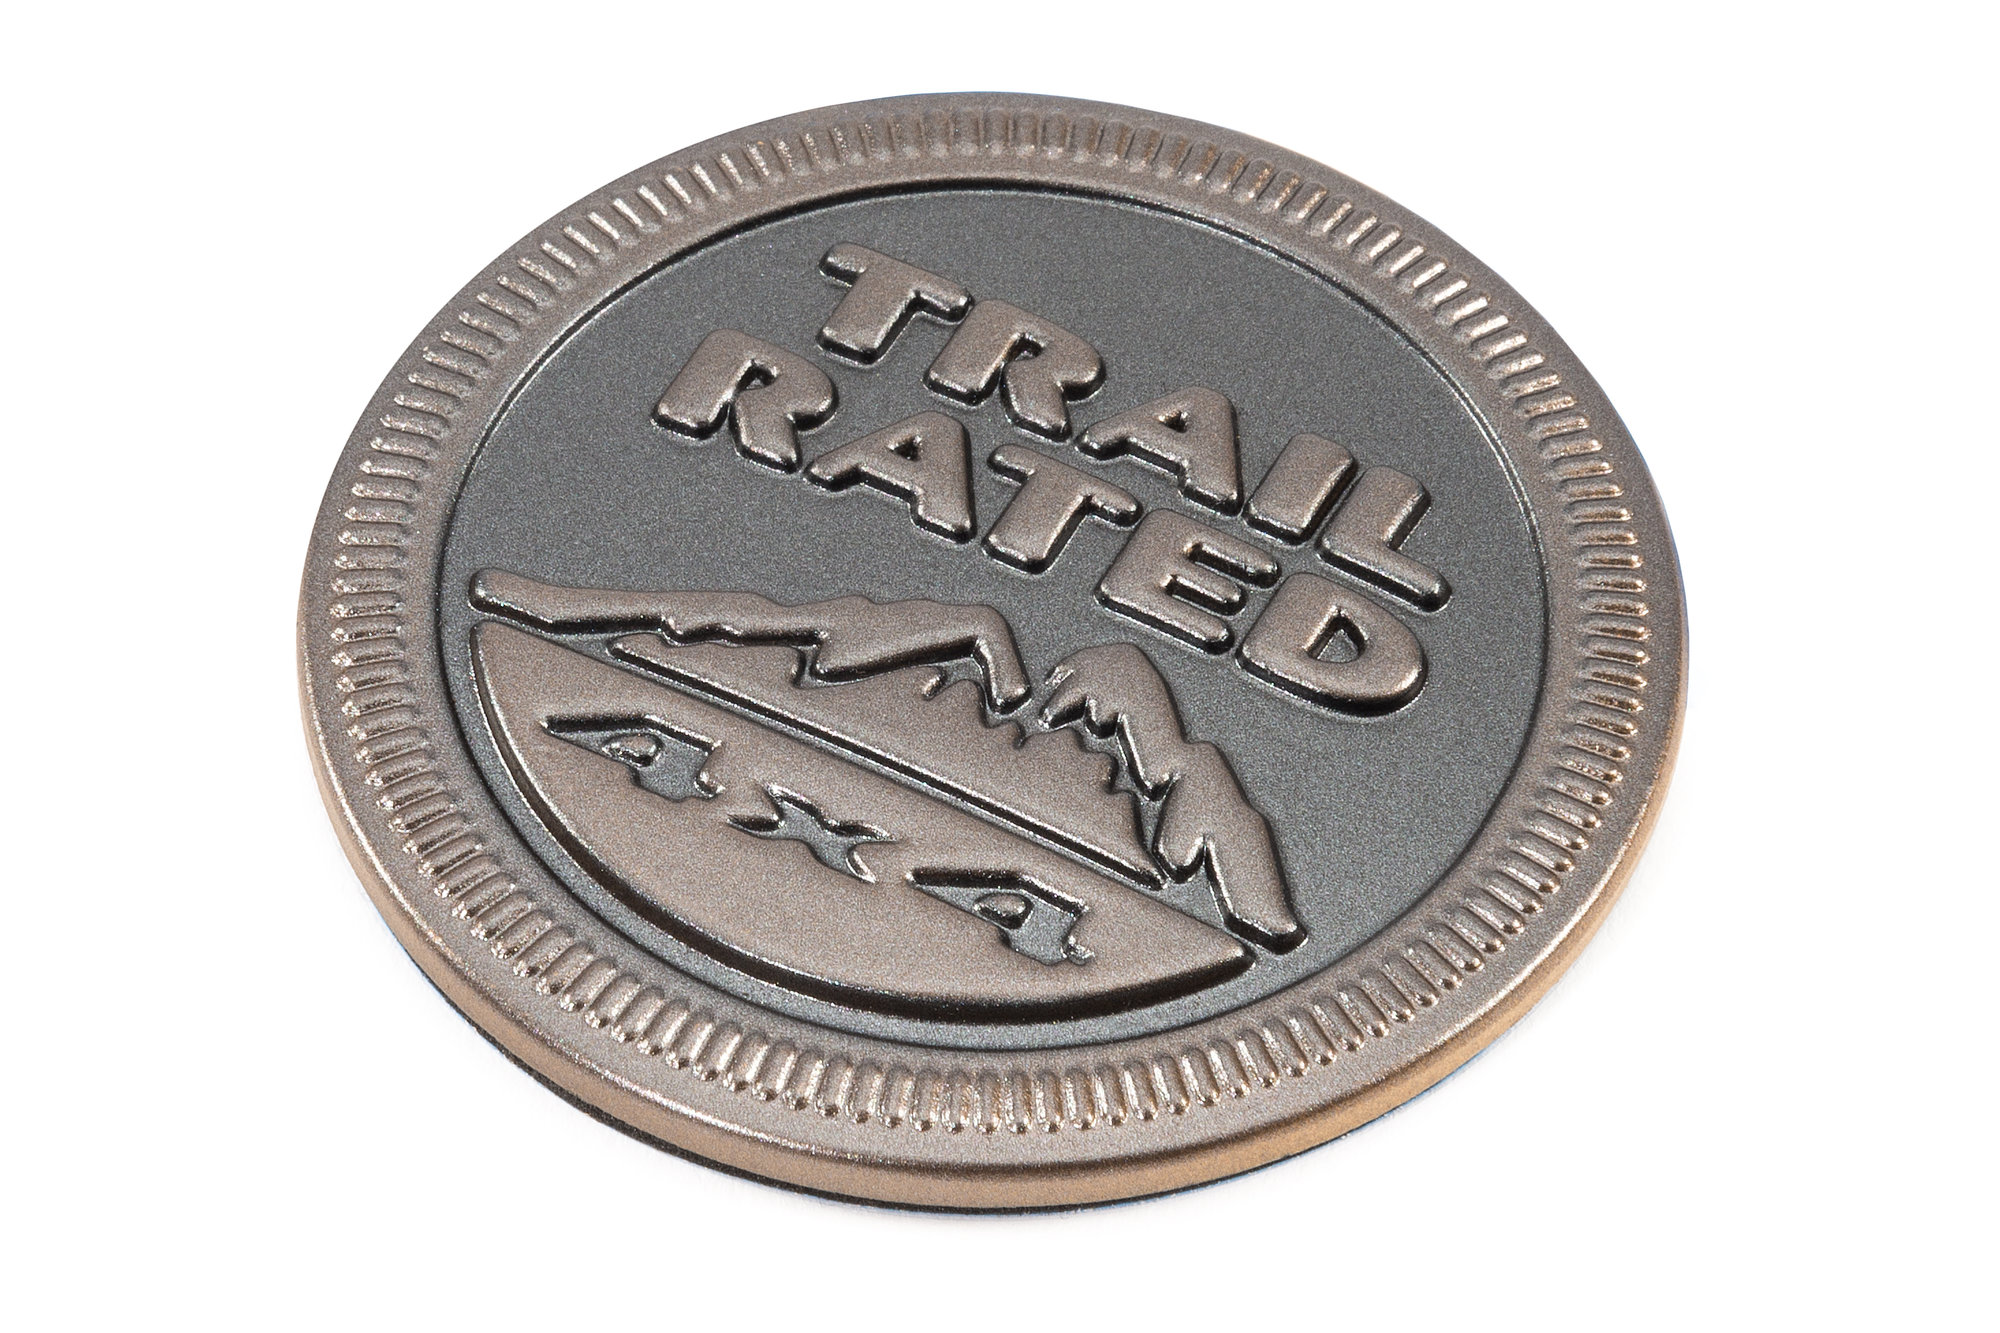 https://www.quadratec.com/sites/default/files/styles/product_zoomed/public/product_images/Mopar_Trail_Rated_Badge_Bronze.jpg